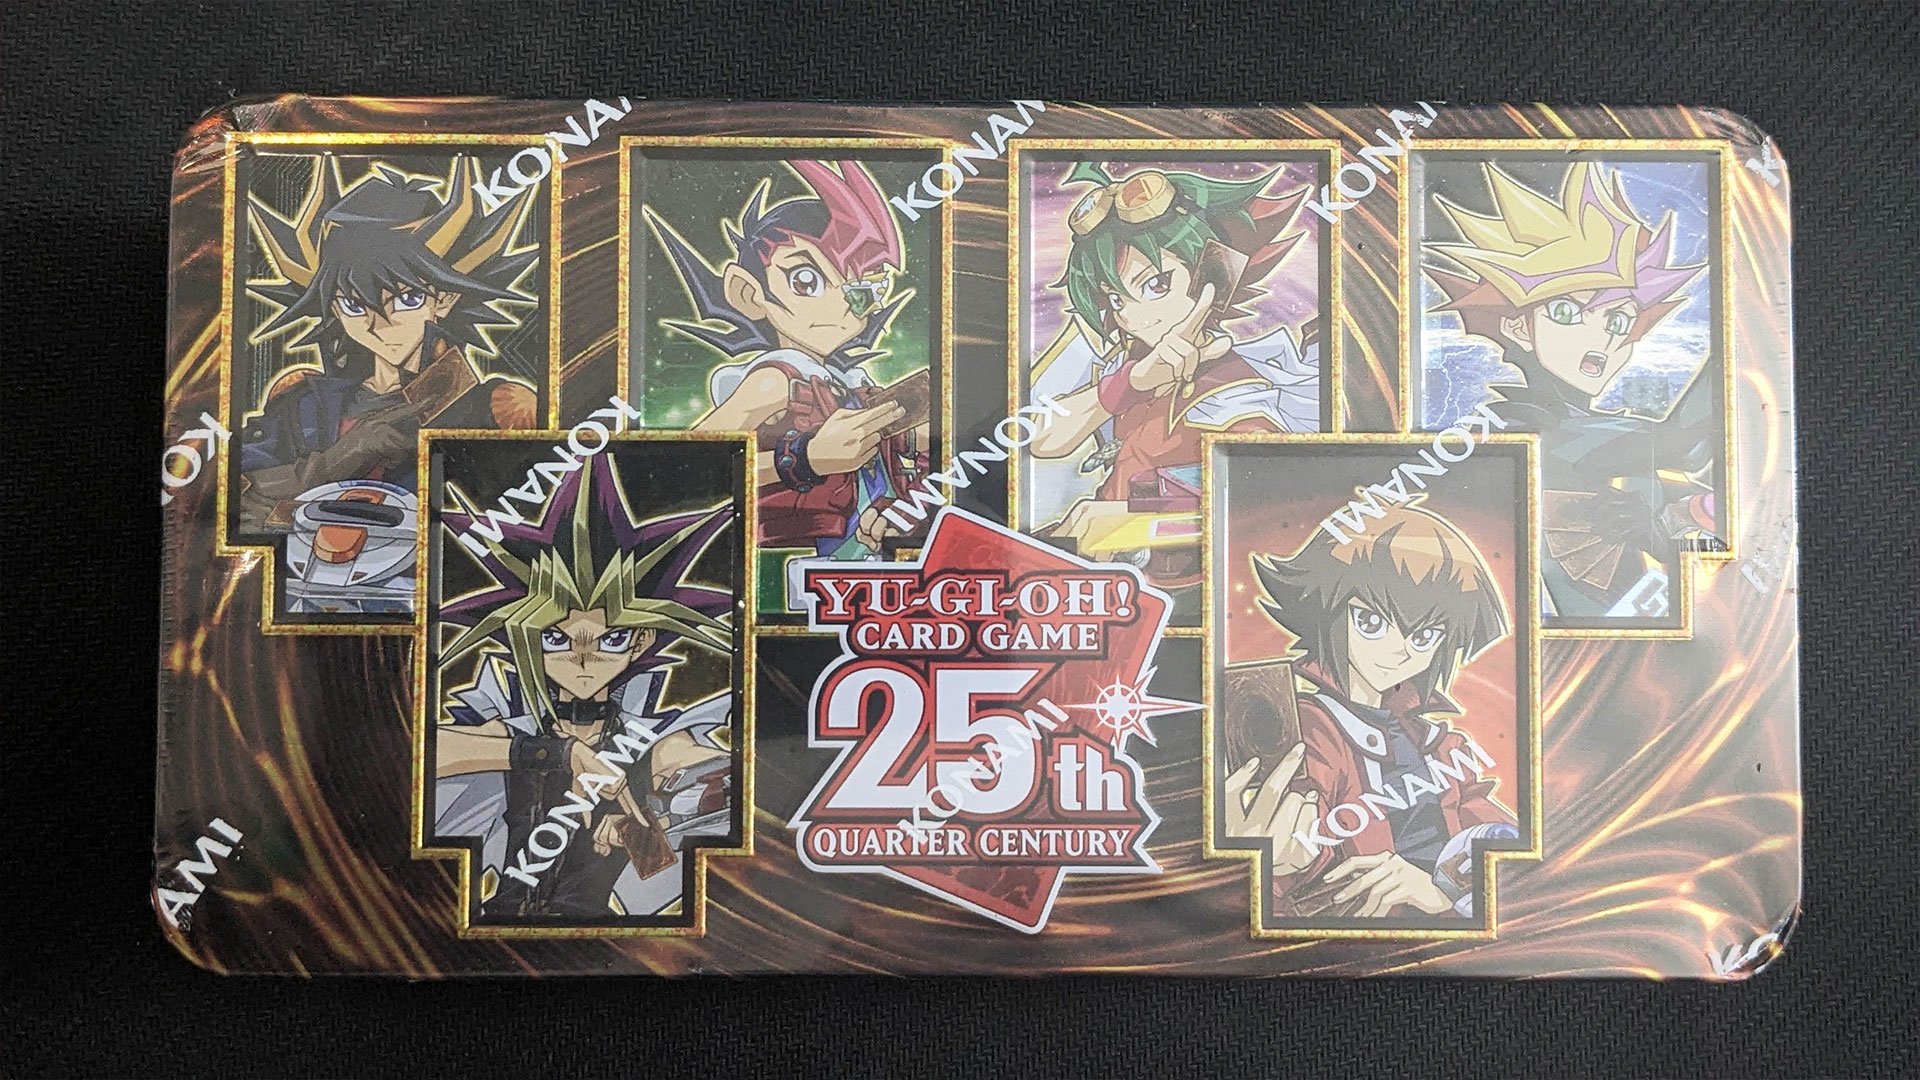 Yu-Gi-Oh! TCG Event Coverage » Tell 'Em What They're Playing For!